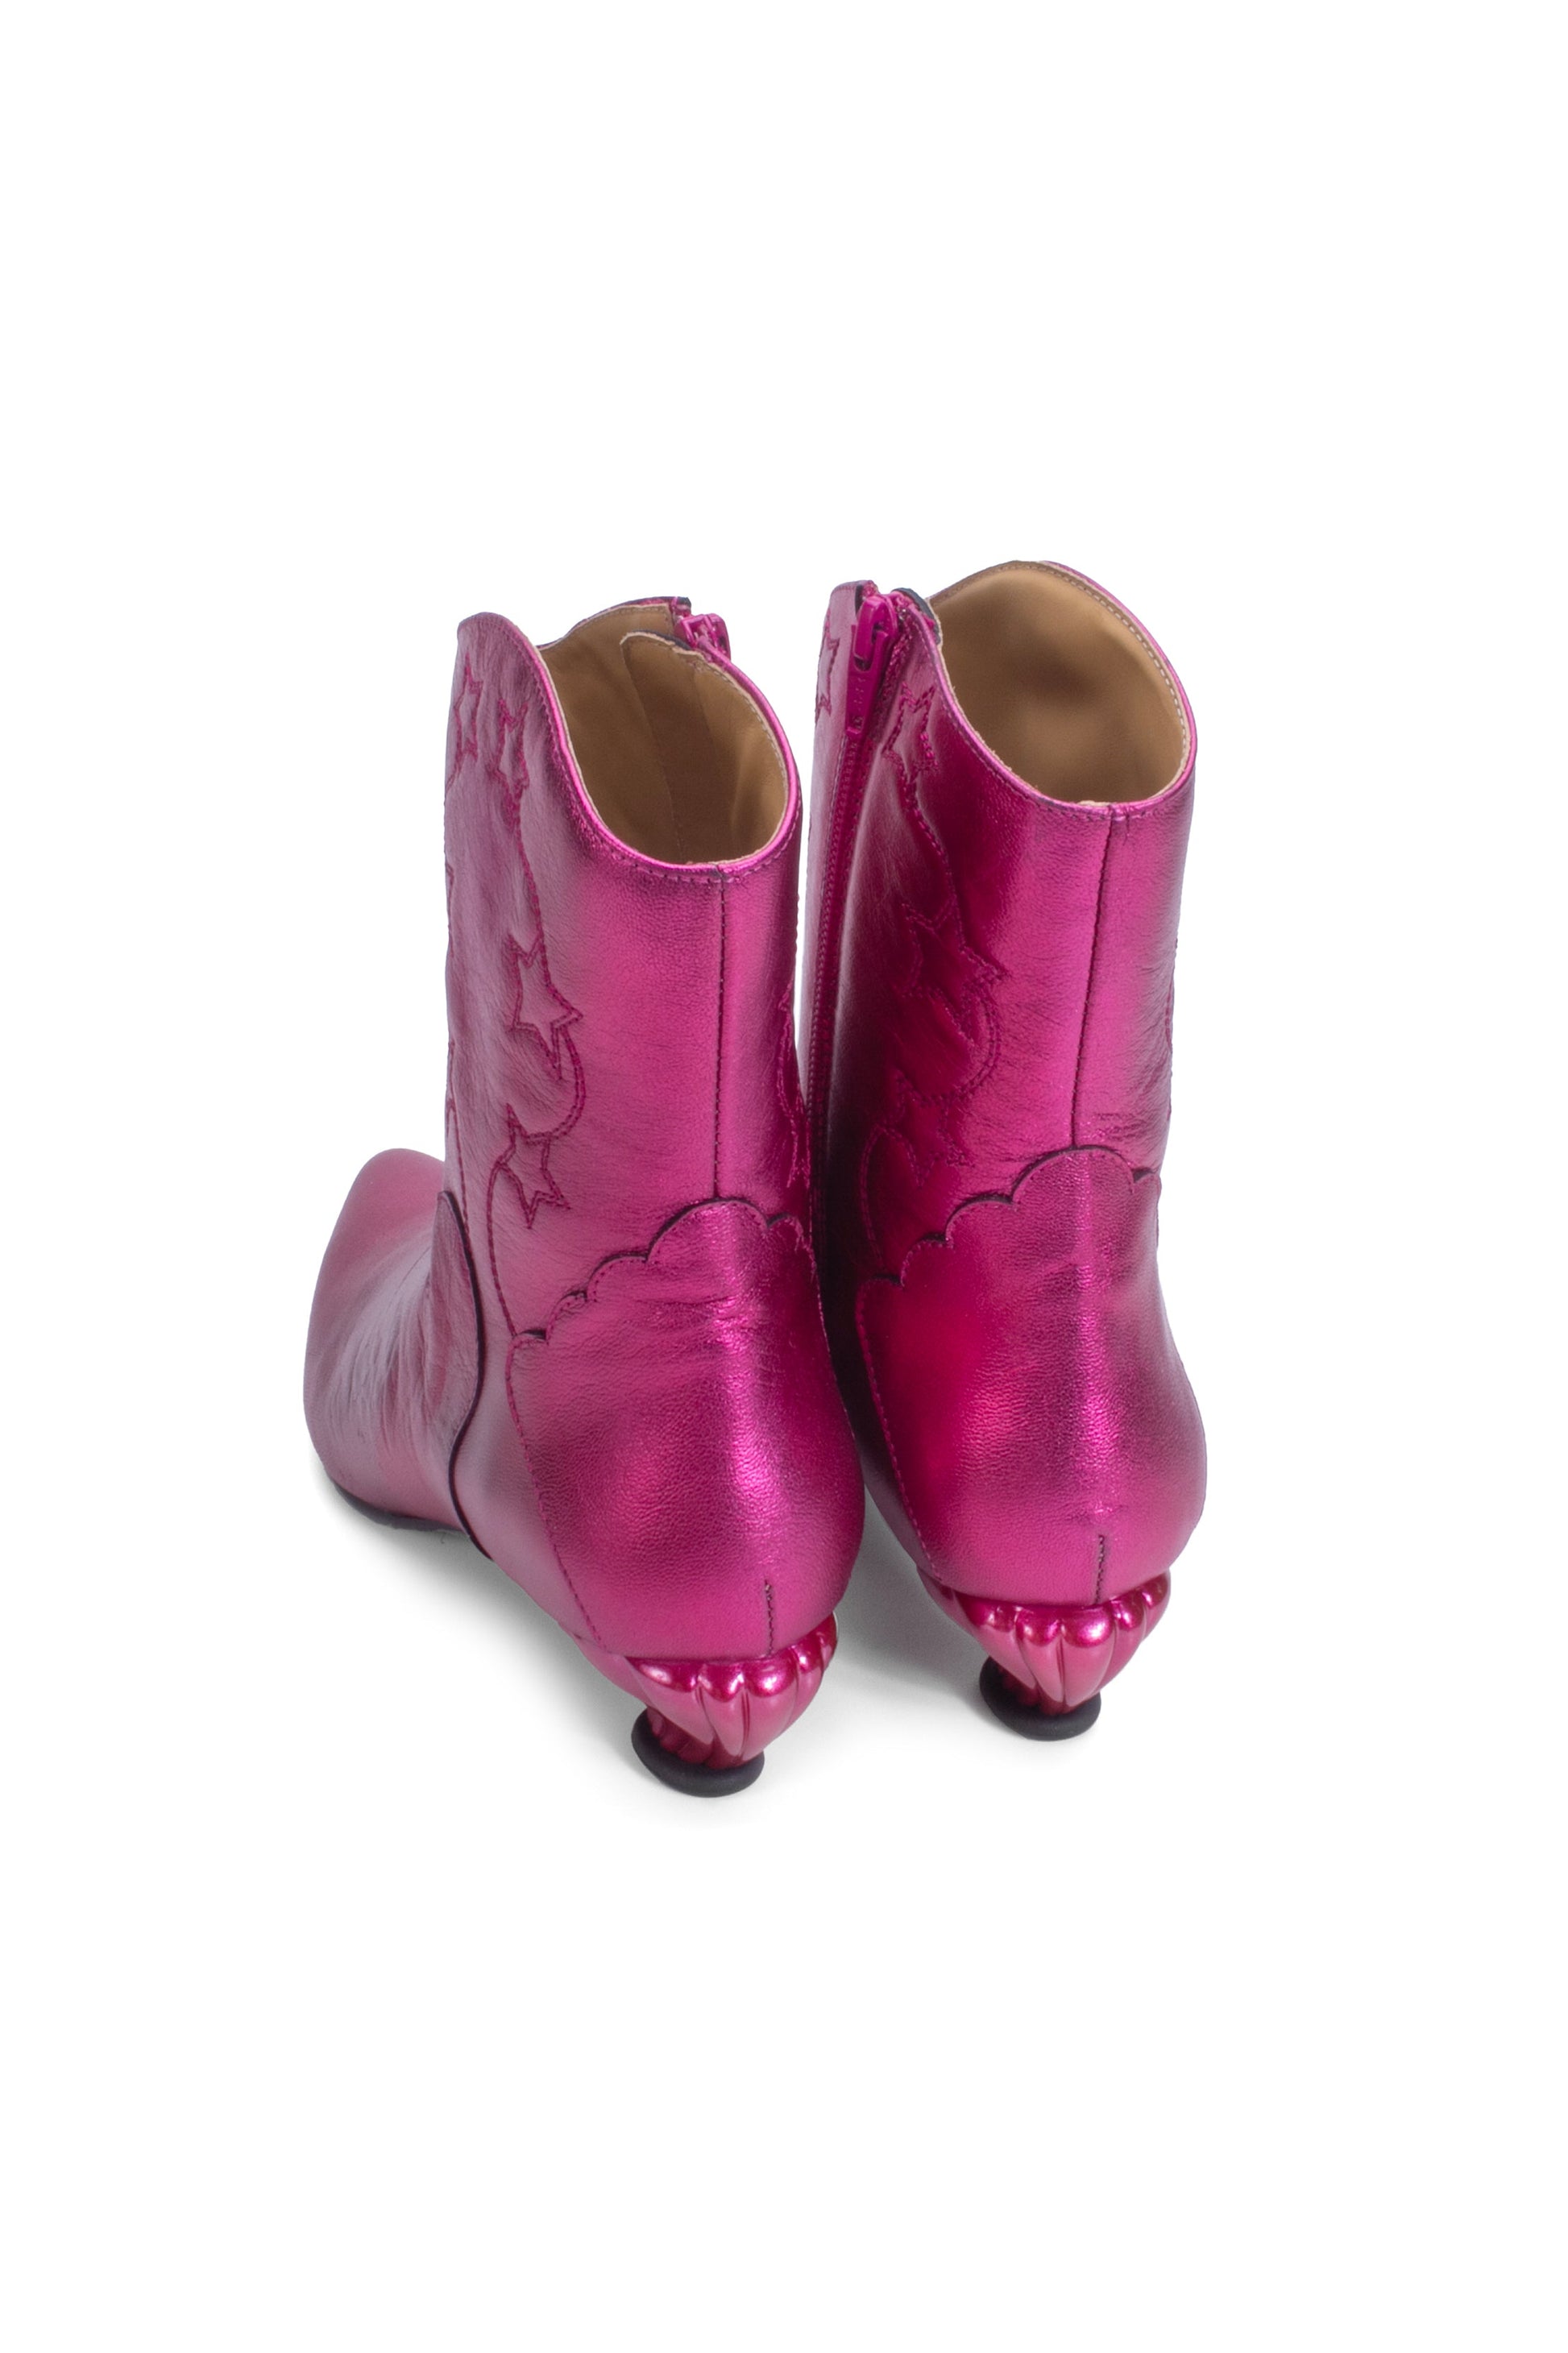 Metallic Azalea Carefully stitched crafted boots with the same pattern on the ankles & front part